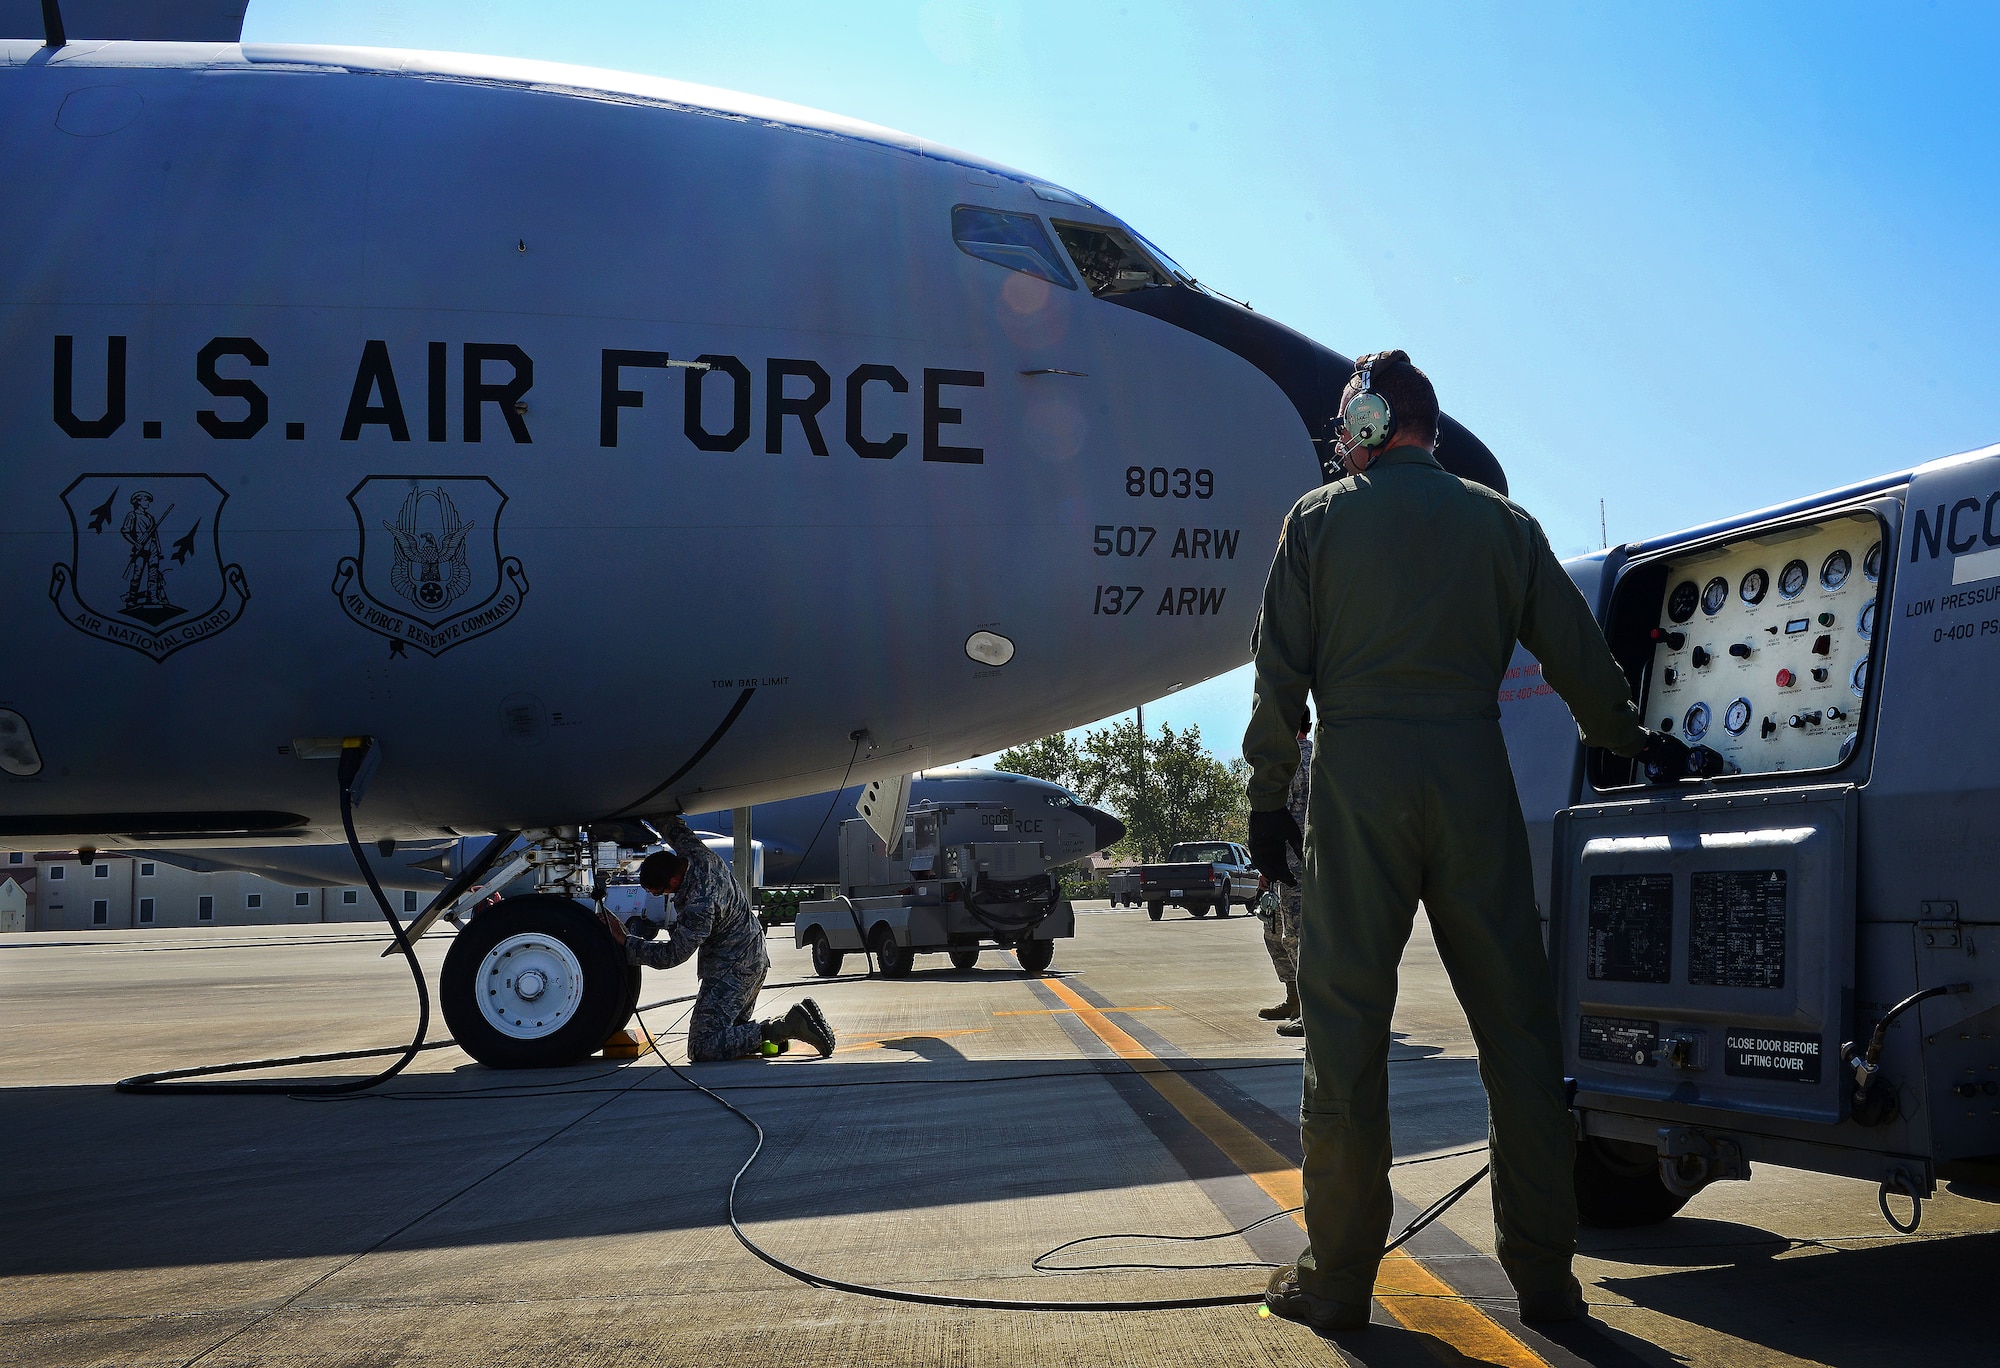 (From left) U.S. Air Force Tech. Sgt. John Sanders pumps air into a KC-135 Stratotanker’s tire while Senior Airman Tim Hardy controls a gauge, April 21, 2015, at Aviano Air Base, Italy. More than 50 Air Force Reservists including chaplains, crew chiefs and force support worked with Aviano units during their two-week required annual tour. Sanders and Hardy are crew chiefs with the 507th Air Refueling Wing Aircraft Maintenance Squadron from Tinker Air Force Base, Okla., (U.S. Air Force photo by Senior Airman Matthew Lotz/Released)